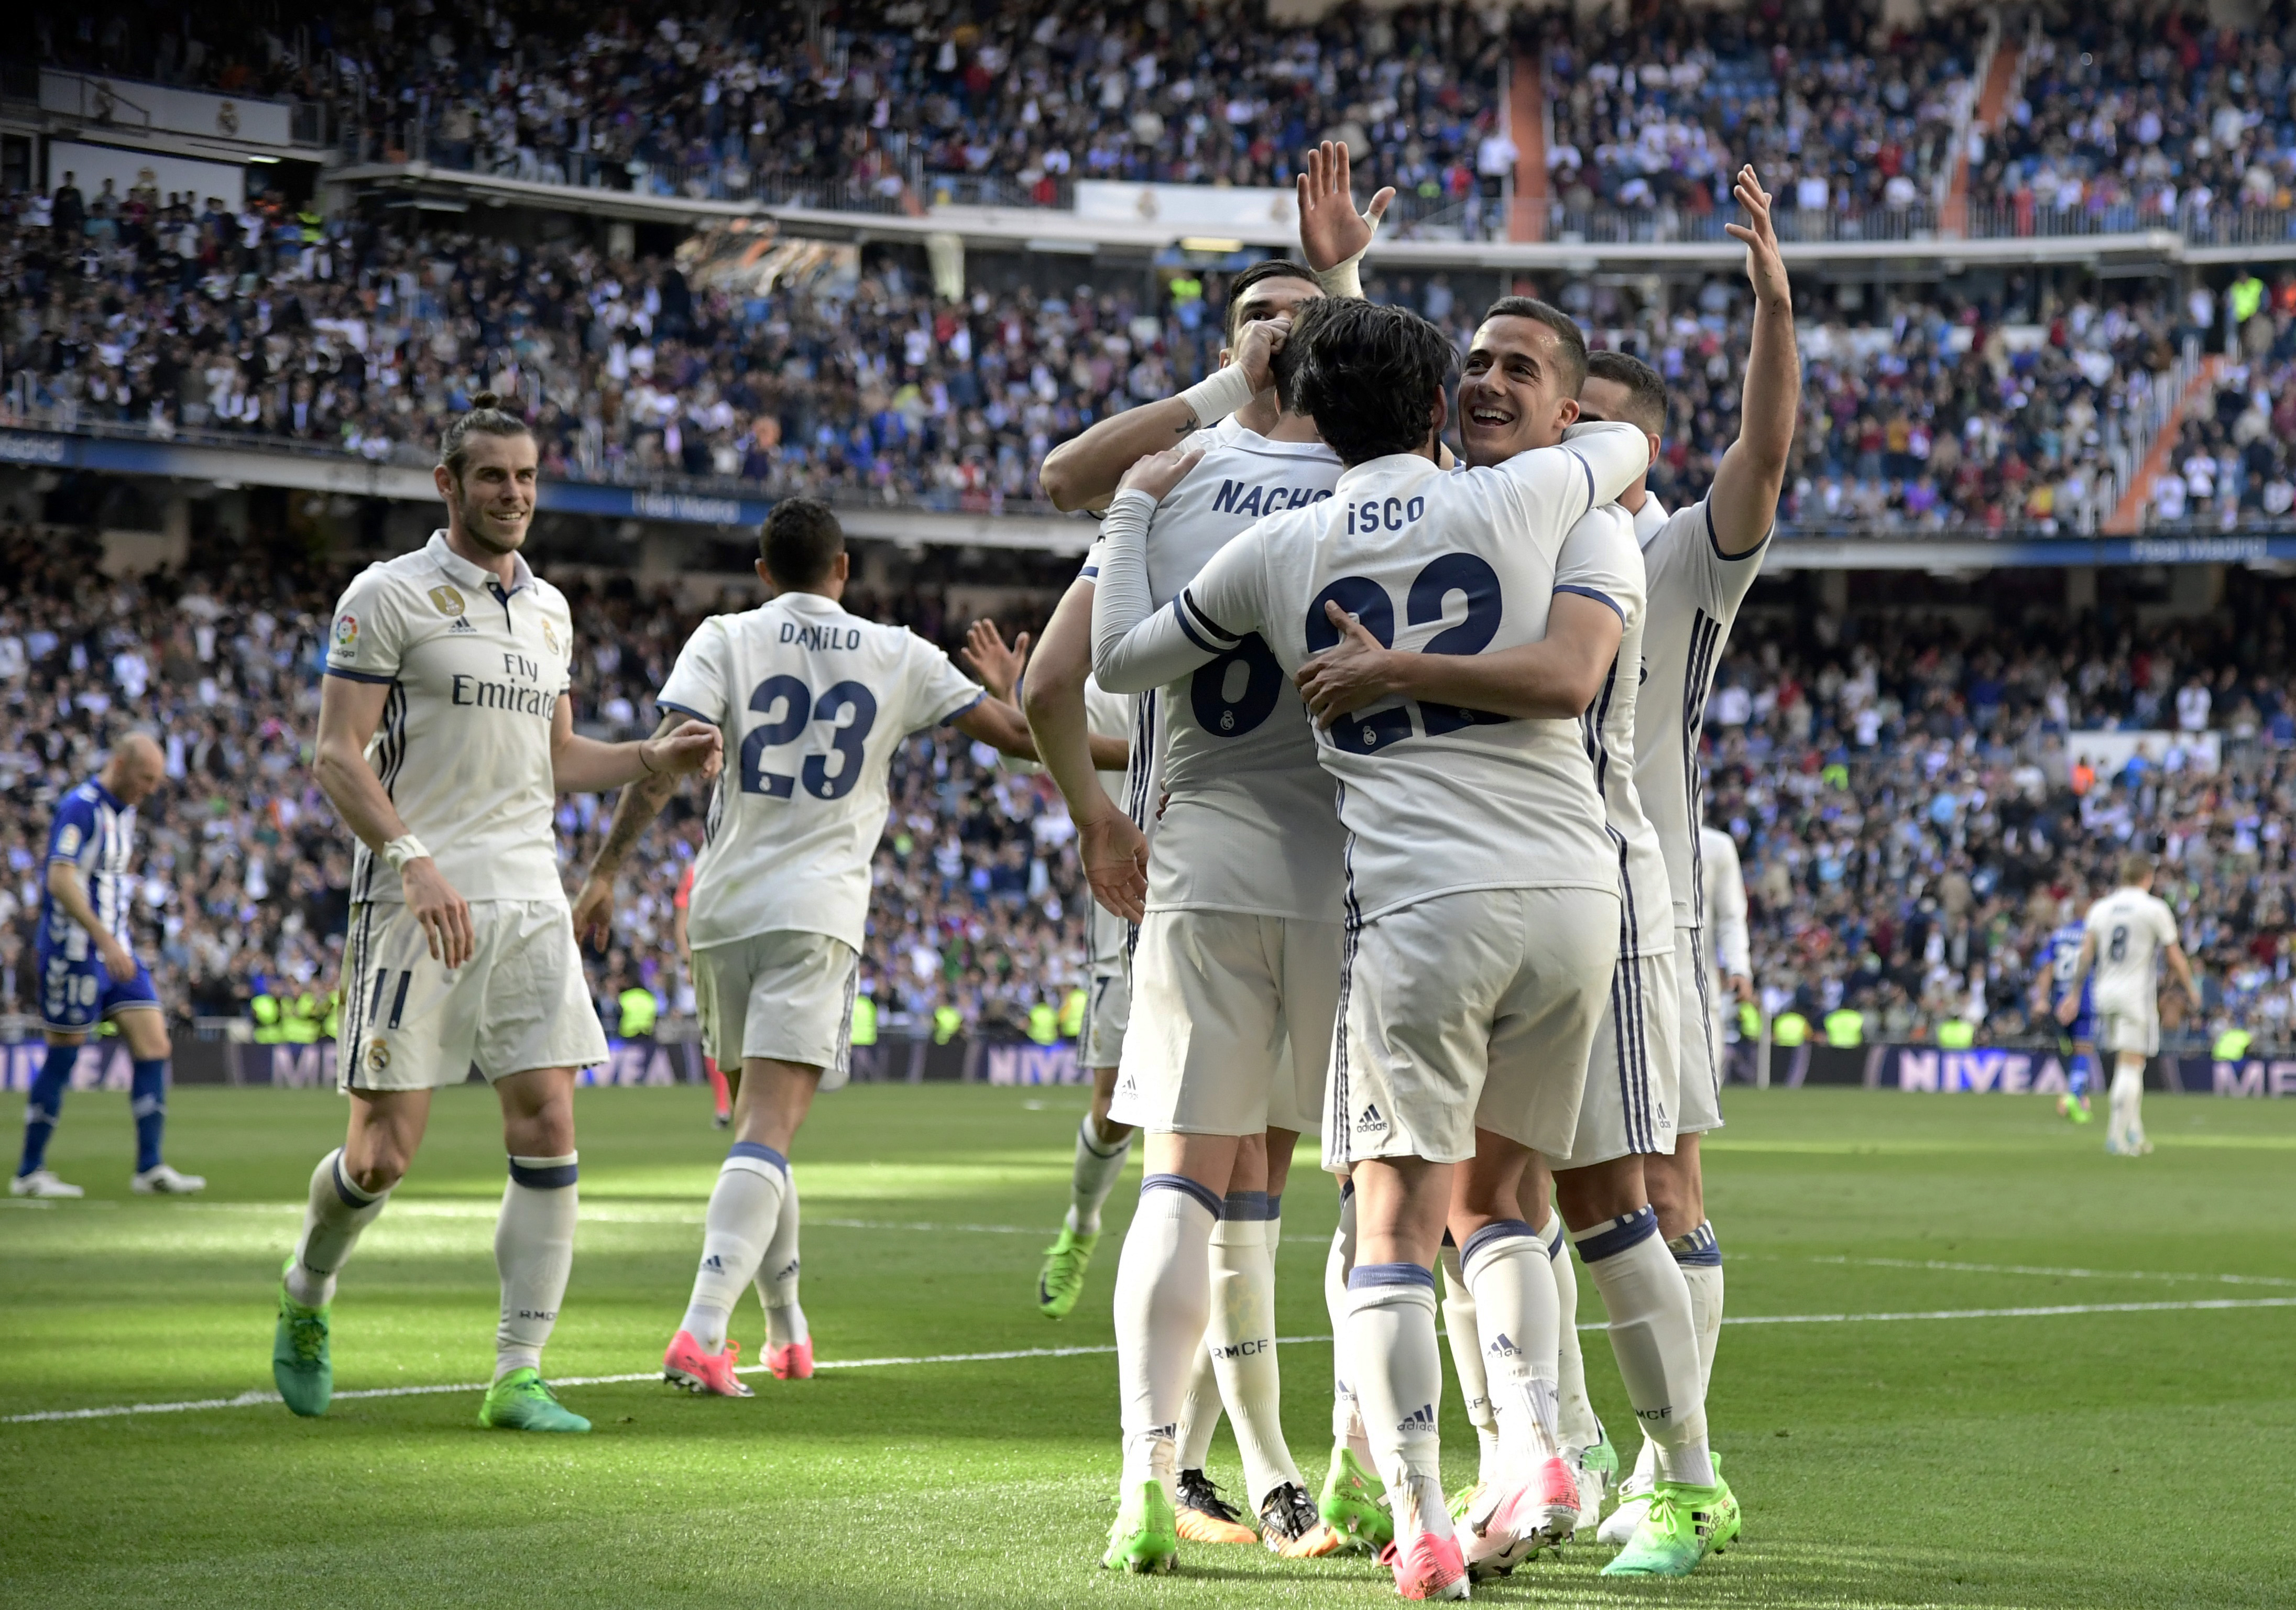 Real Madrid players celebrate a goal during the Spanish league football match Real Madrid CF vs Deportivo Alaves at the Santiago Bernabeu stadium in Madrid on April 2, 2017. / AFP PHOTO / JAVIER SORIANO        (Photo credit should read JAVIER SORIANO/AFP/Getty Images)